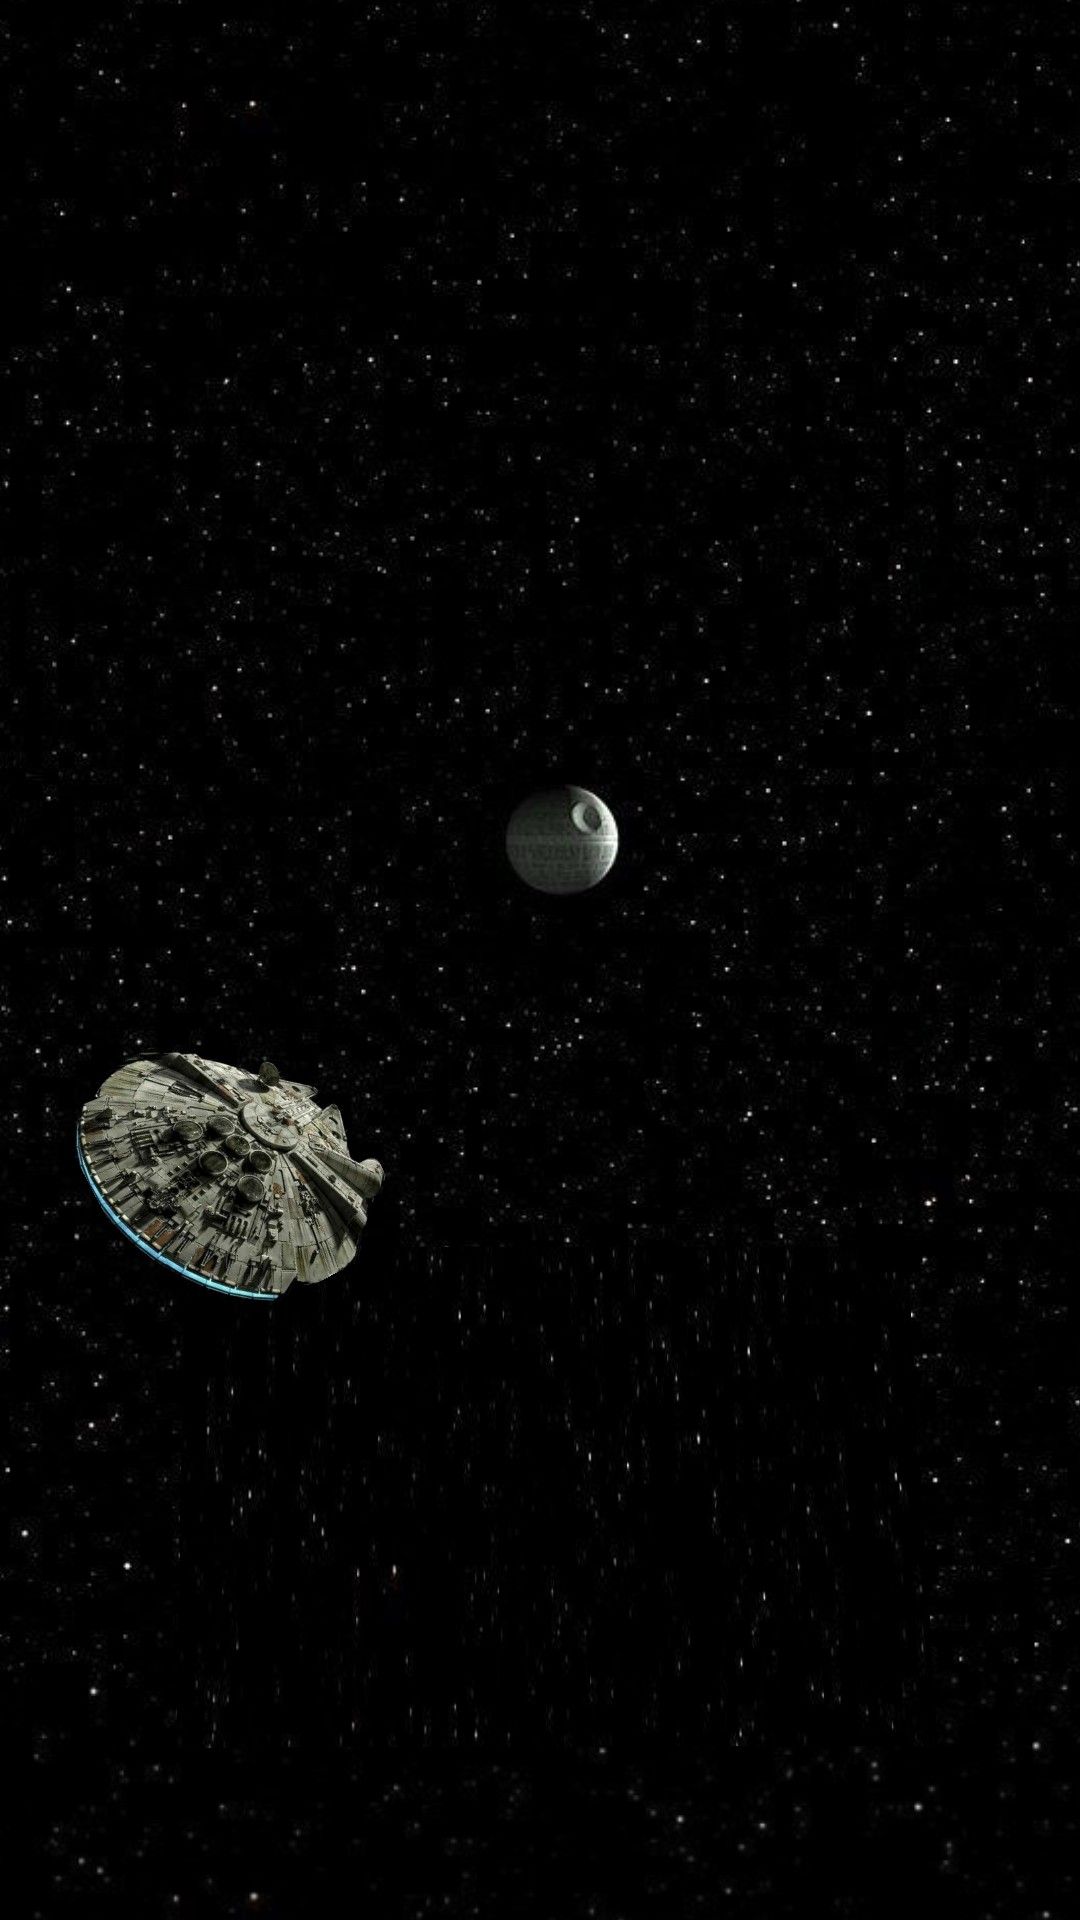 That S No Moon It A Space Station Star Wars Universe